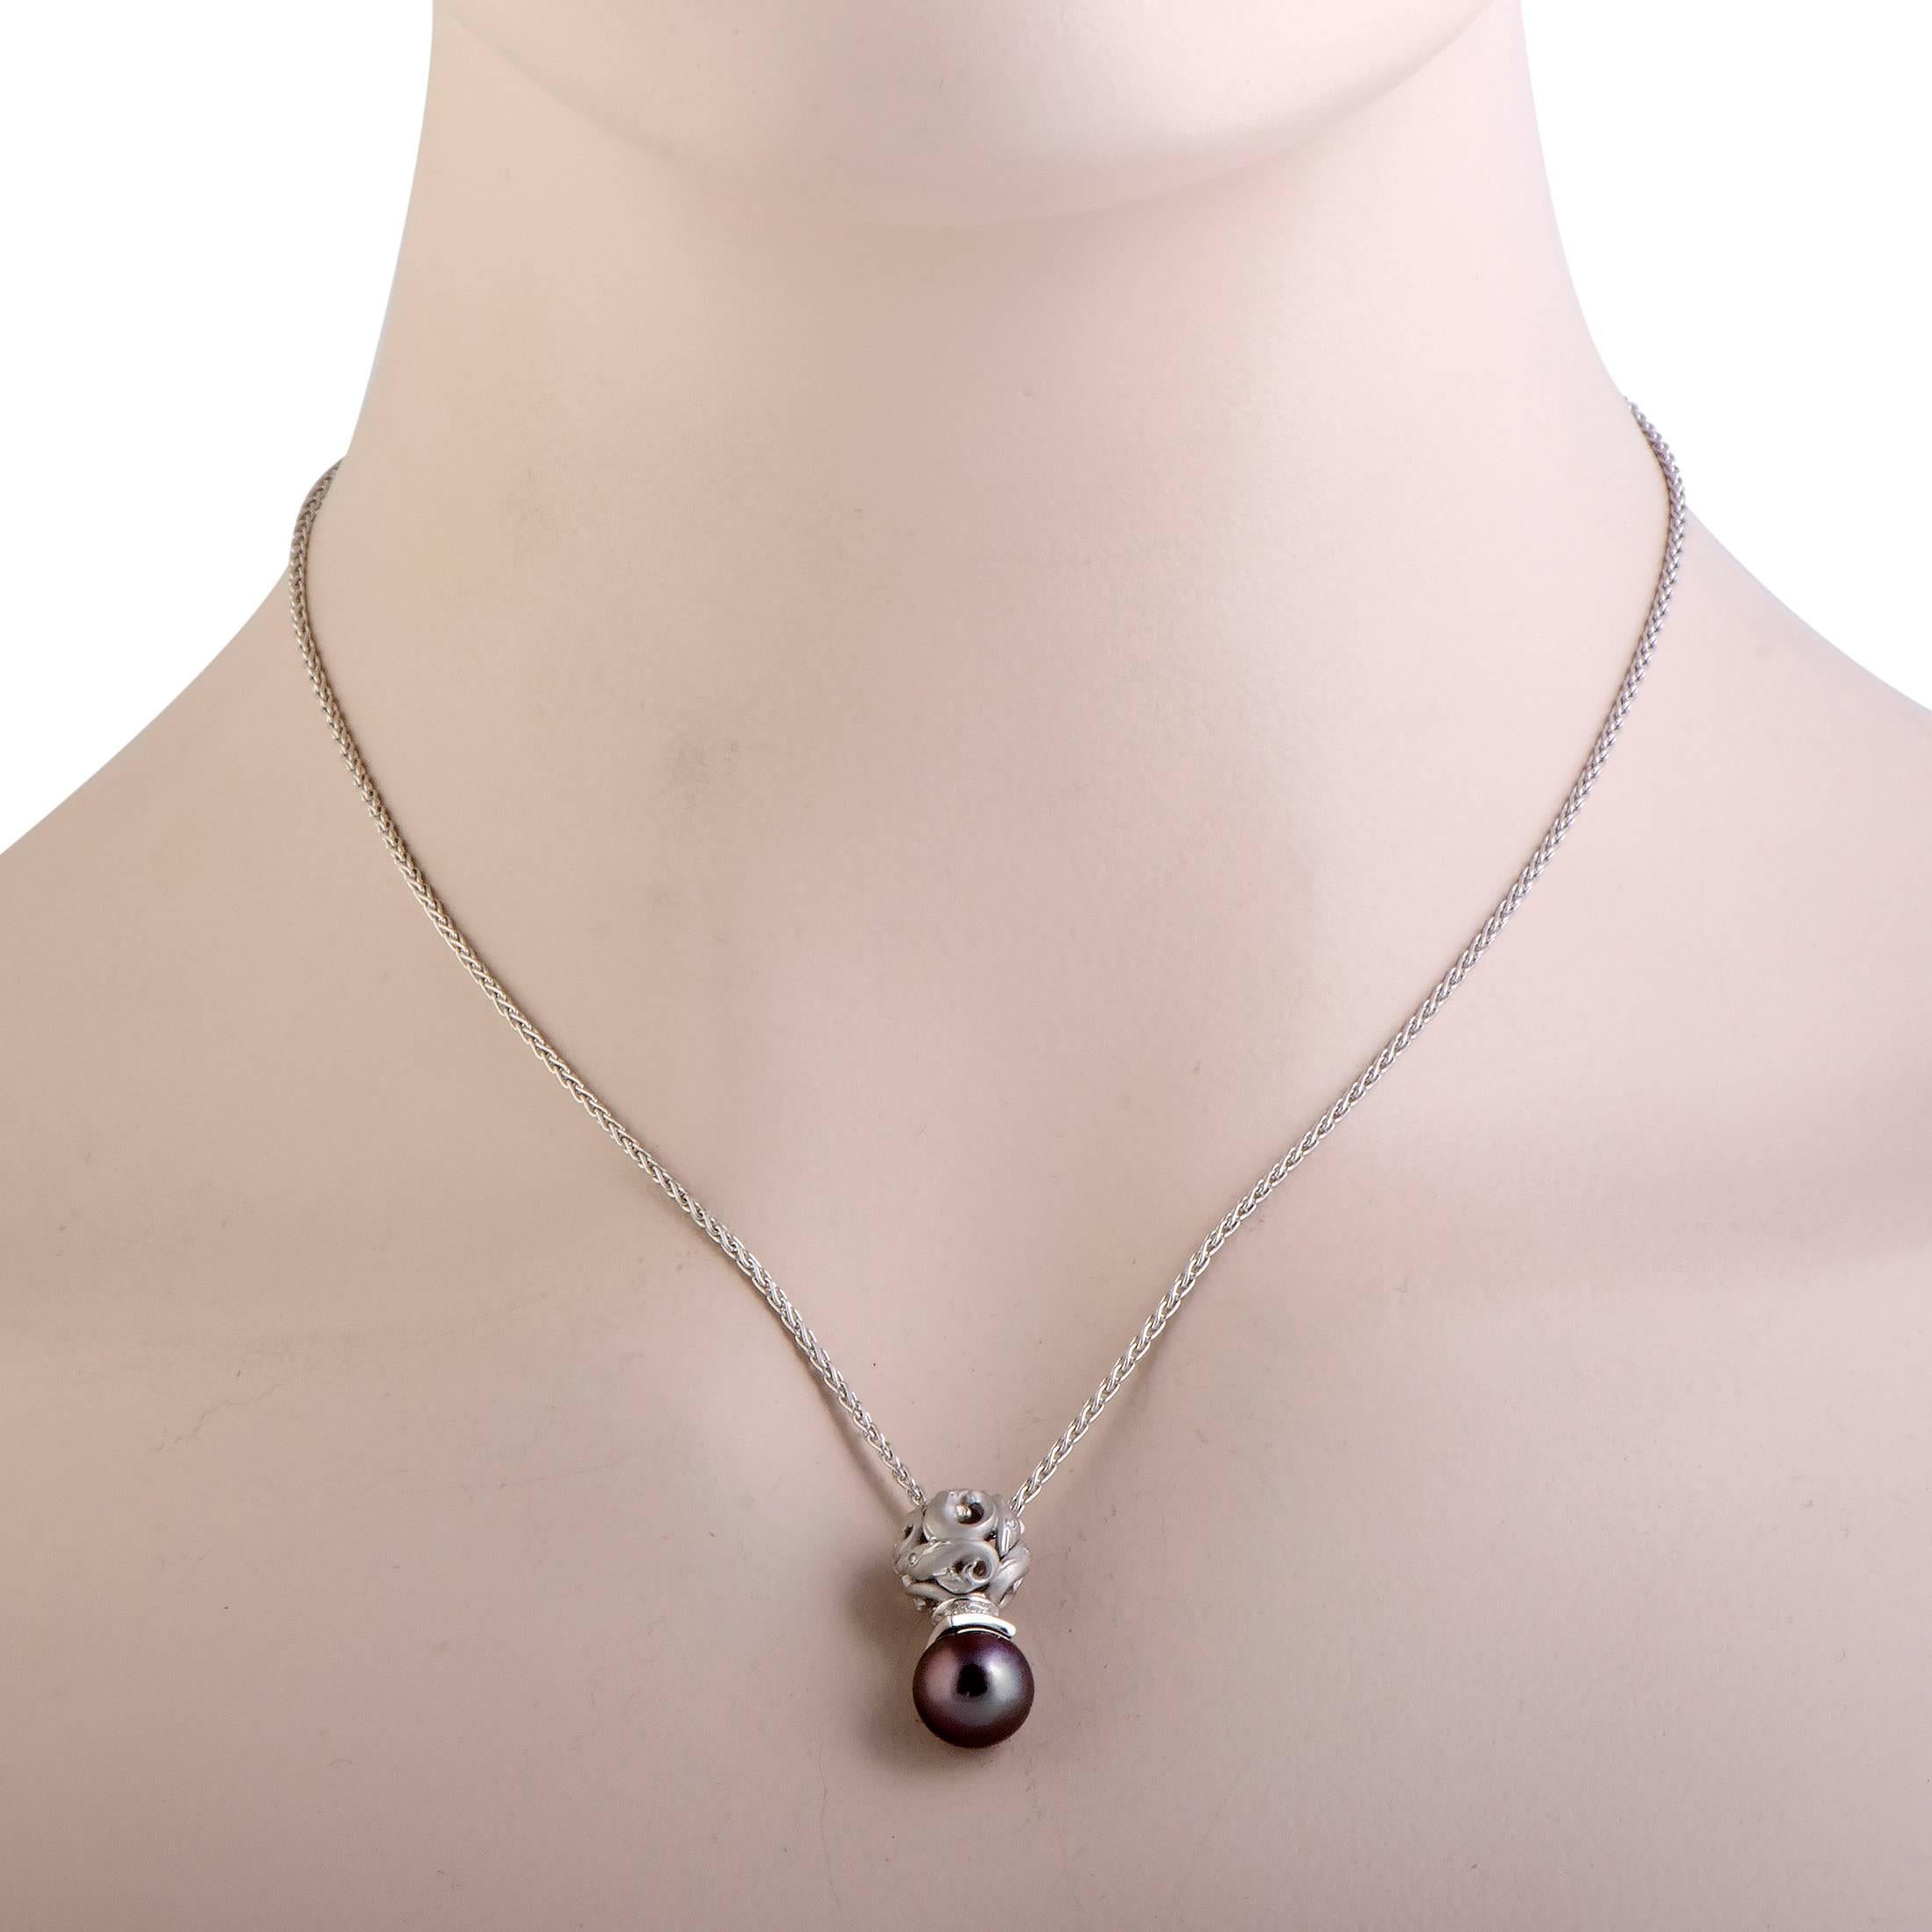 Producing an enchanting effect, the prestigious 18K white gold and alluring black pearl are harmoniously combined in this sublime piece designed by Carrera y Carrera. The necklace also boasts splendid diamonds that add a nifty luxurious touch to the